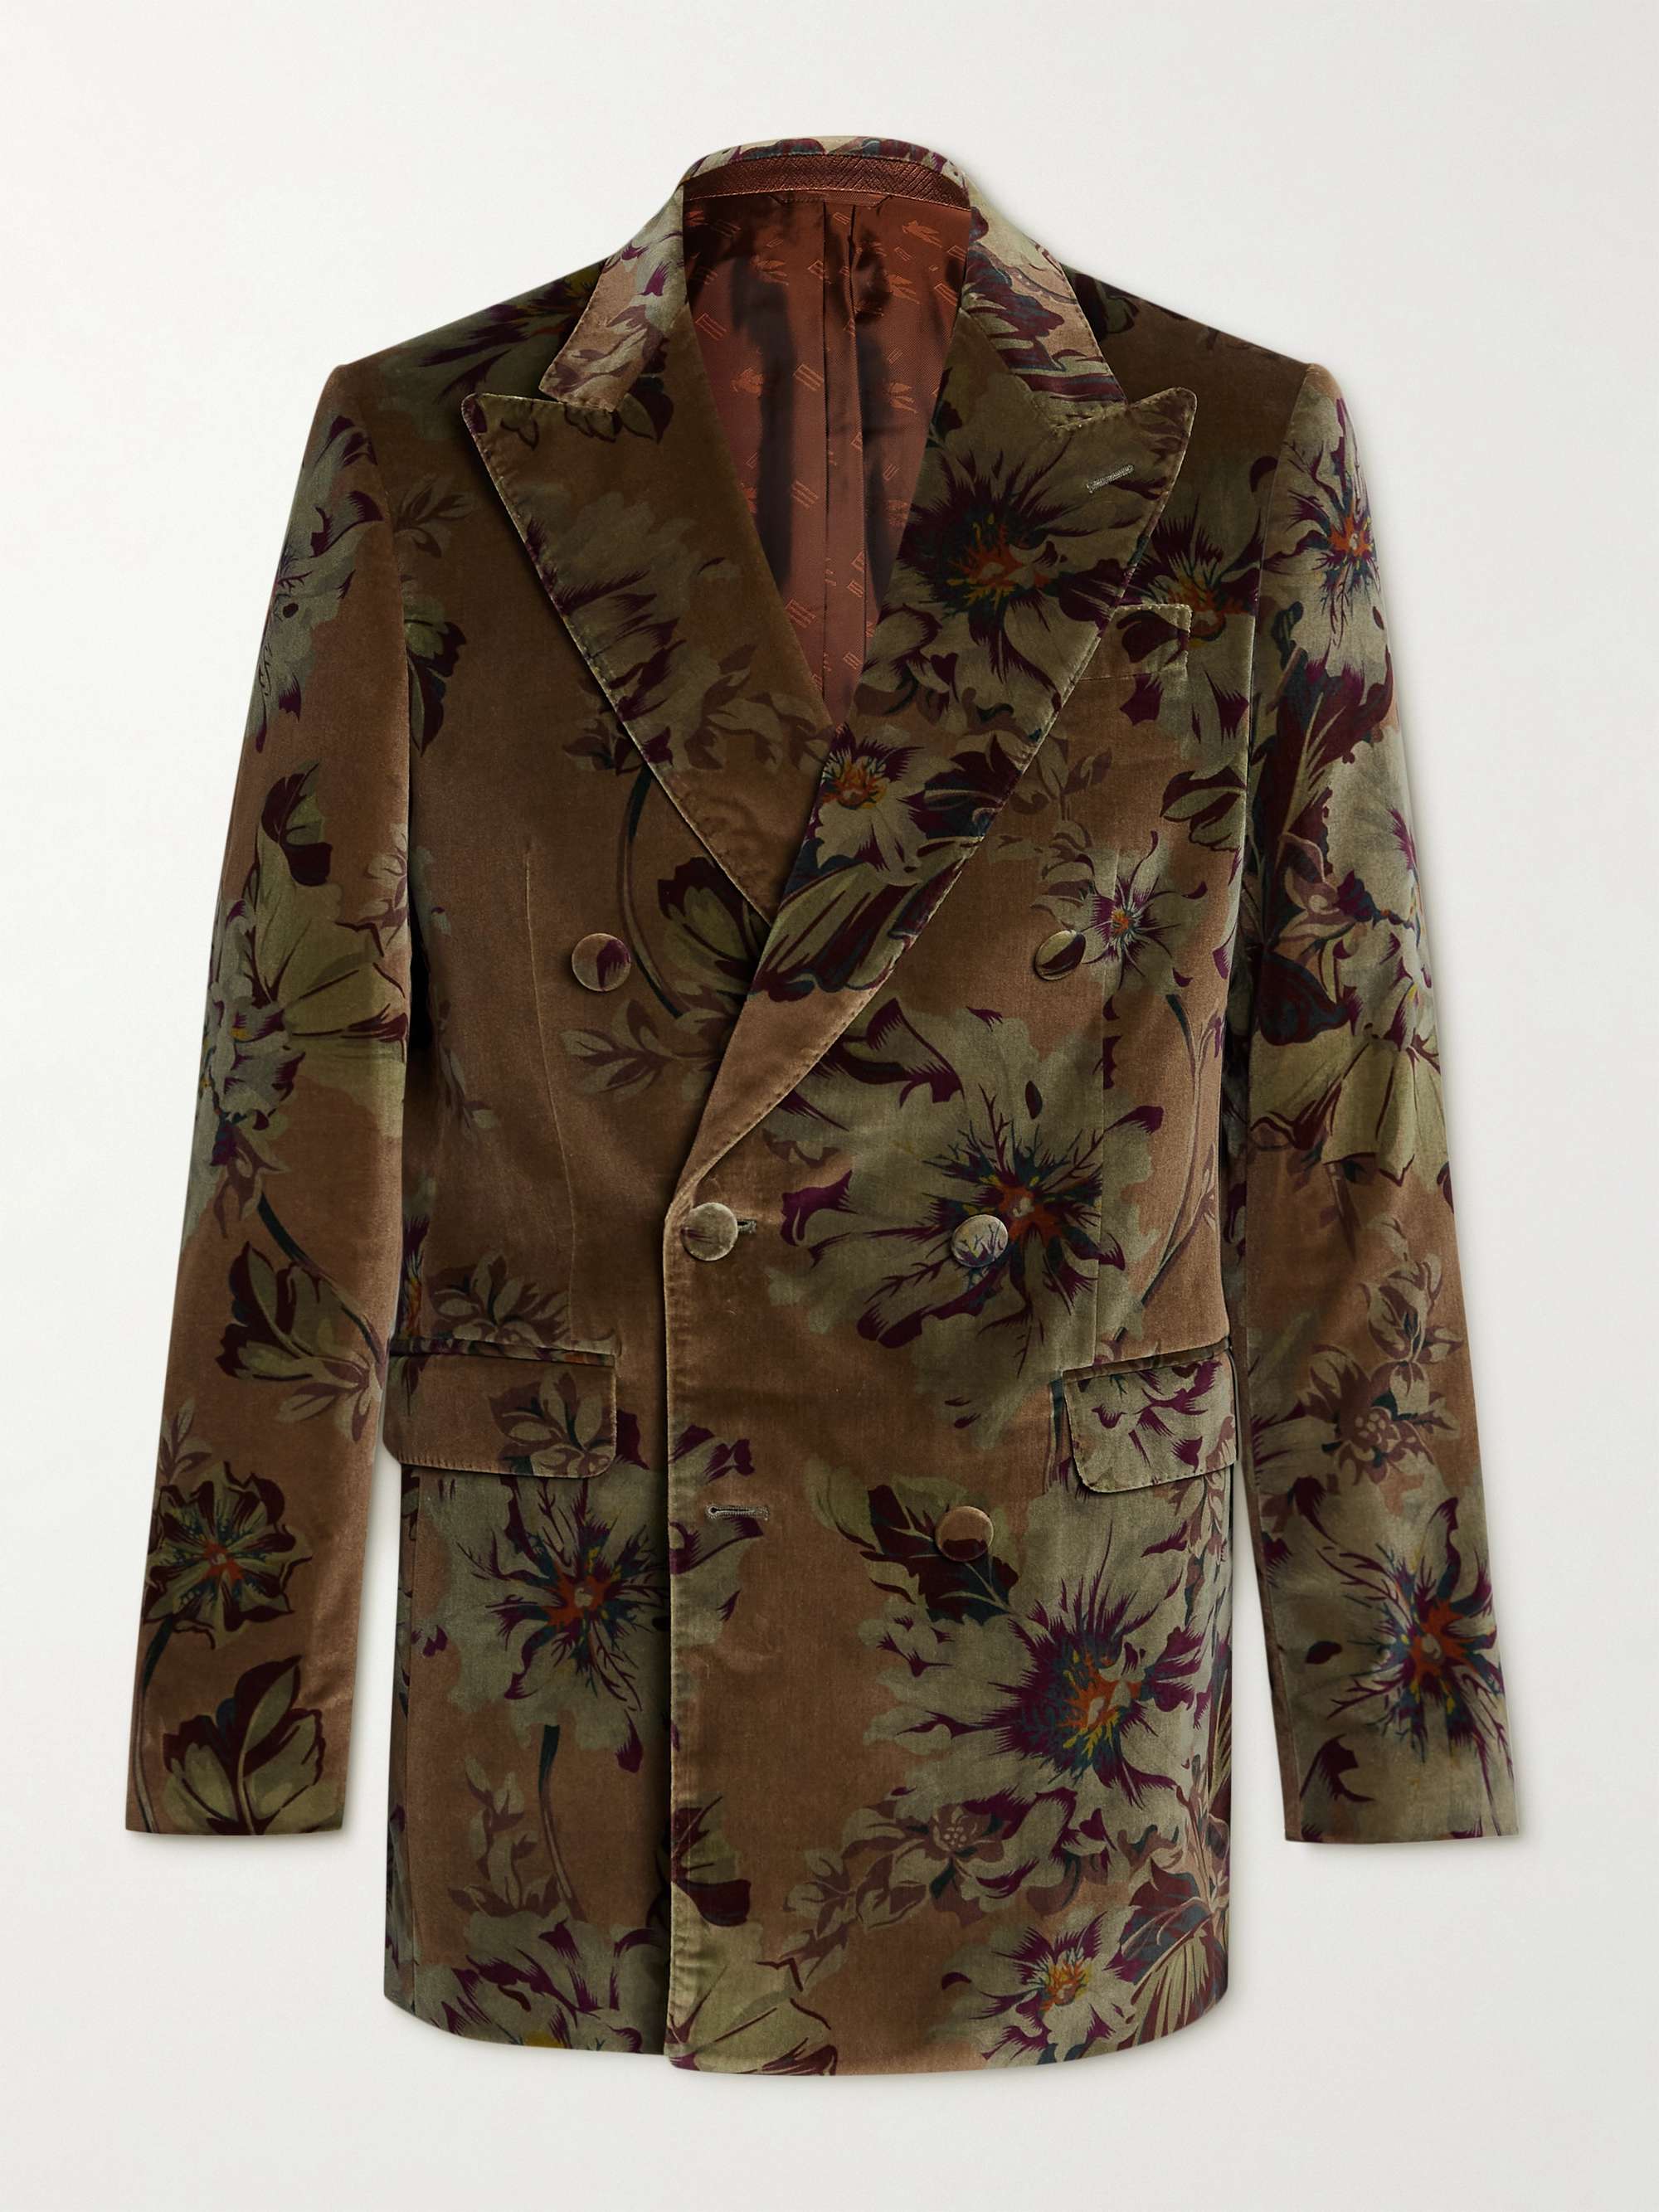 ETRO Double-Breasted Printed Cotton-Blend Velvet Suit Jacket